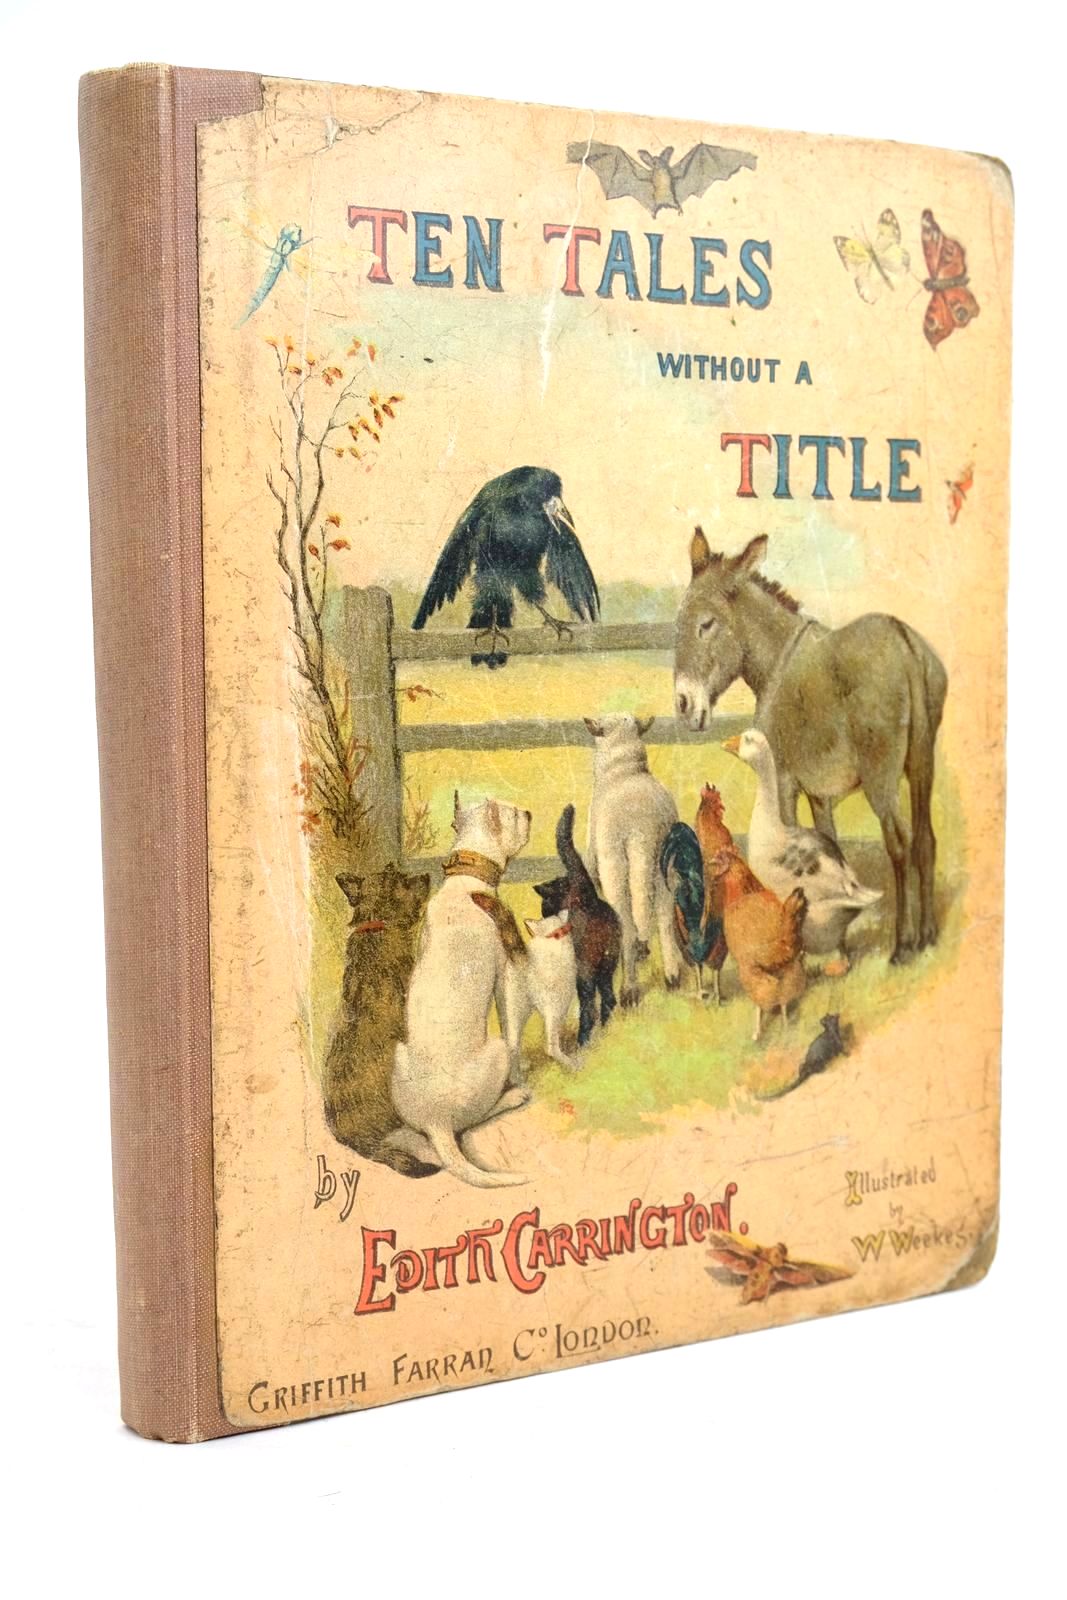 Photo of TEN TALES WITHOUT A TITLE written by Carrington, Edith illustrated by Weekes, W. published by Griffith Farran &amp; Co. (STOCK CODE: 1320425)  for sale by Stella & Rose's Books